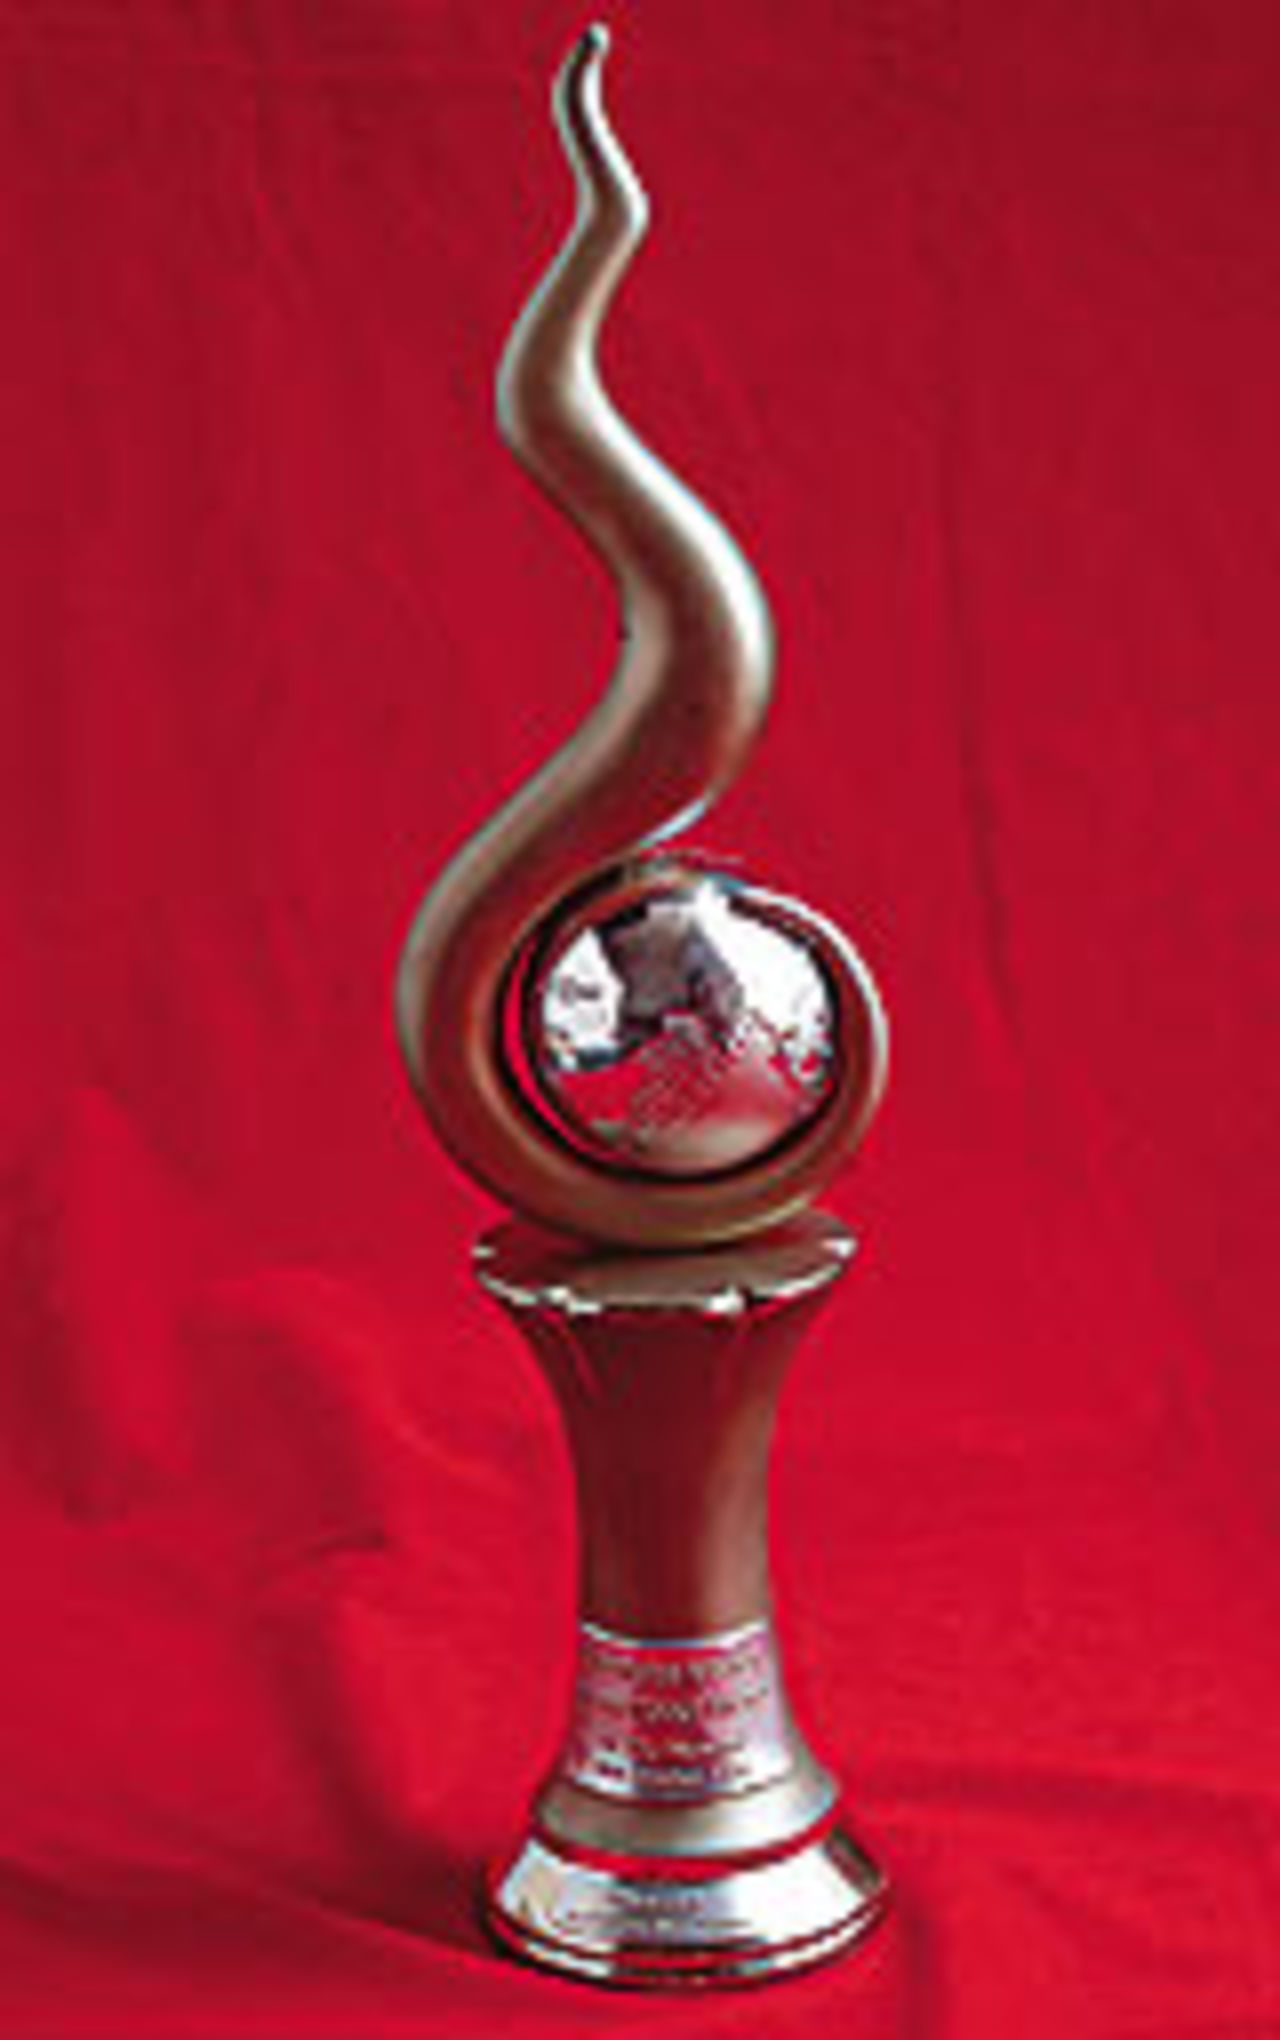 The trophy for the Electrolux Wisden International Cricketer awards